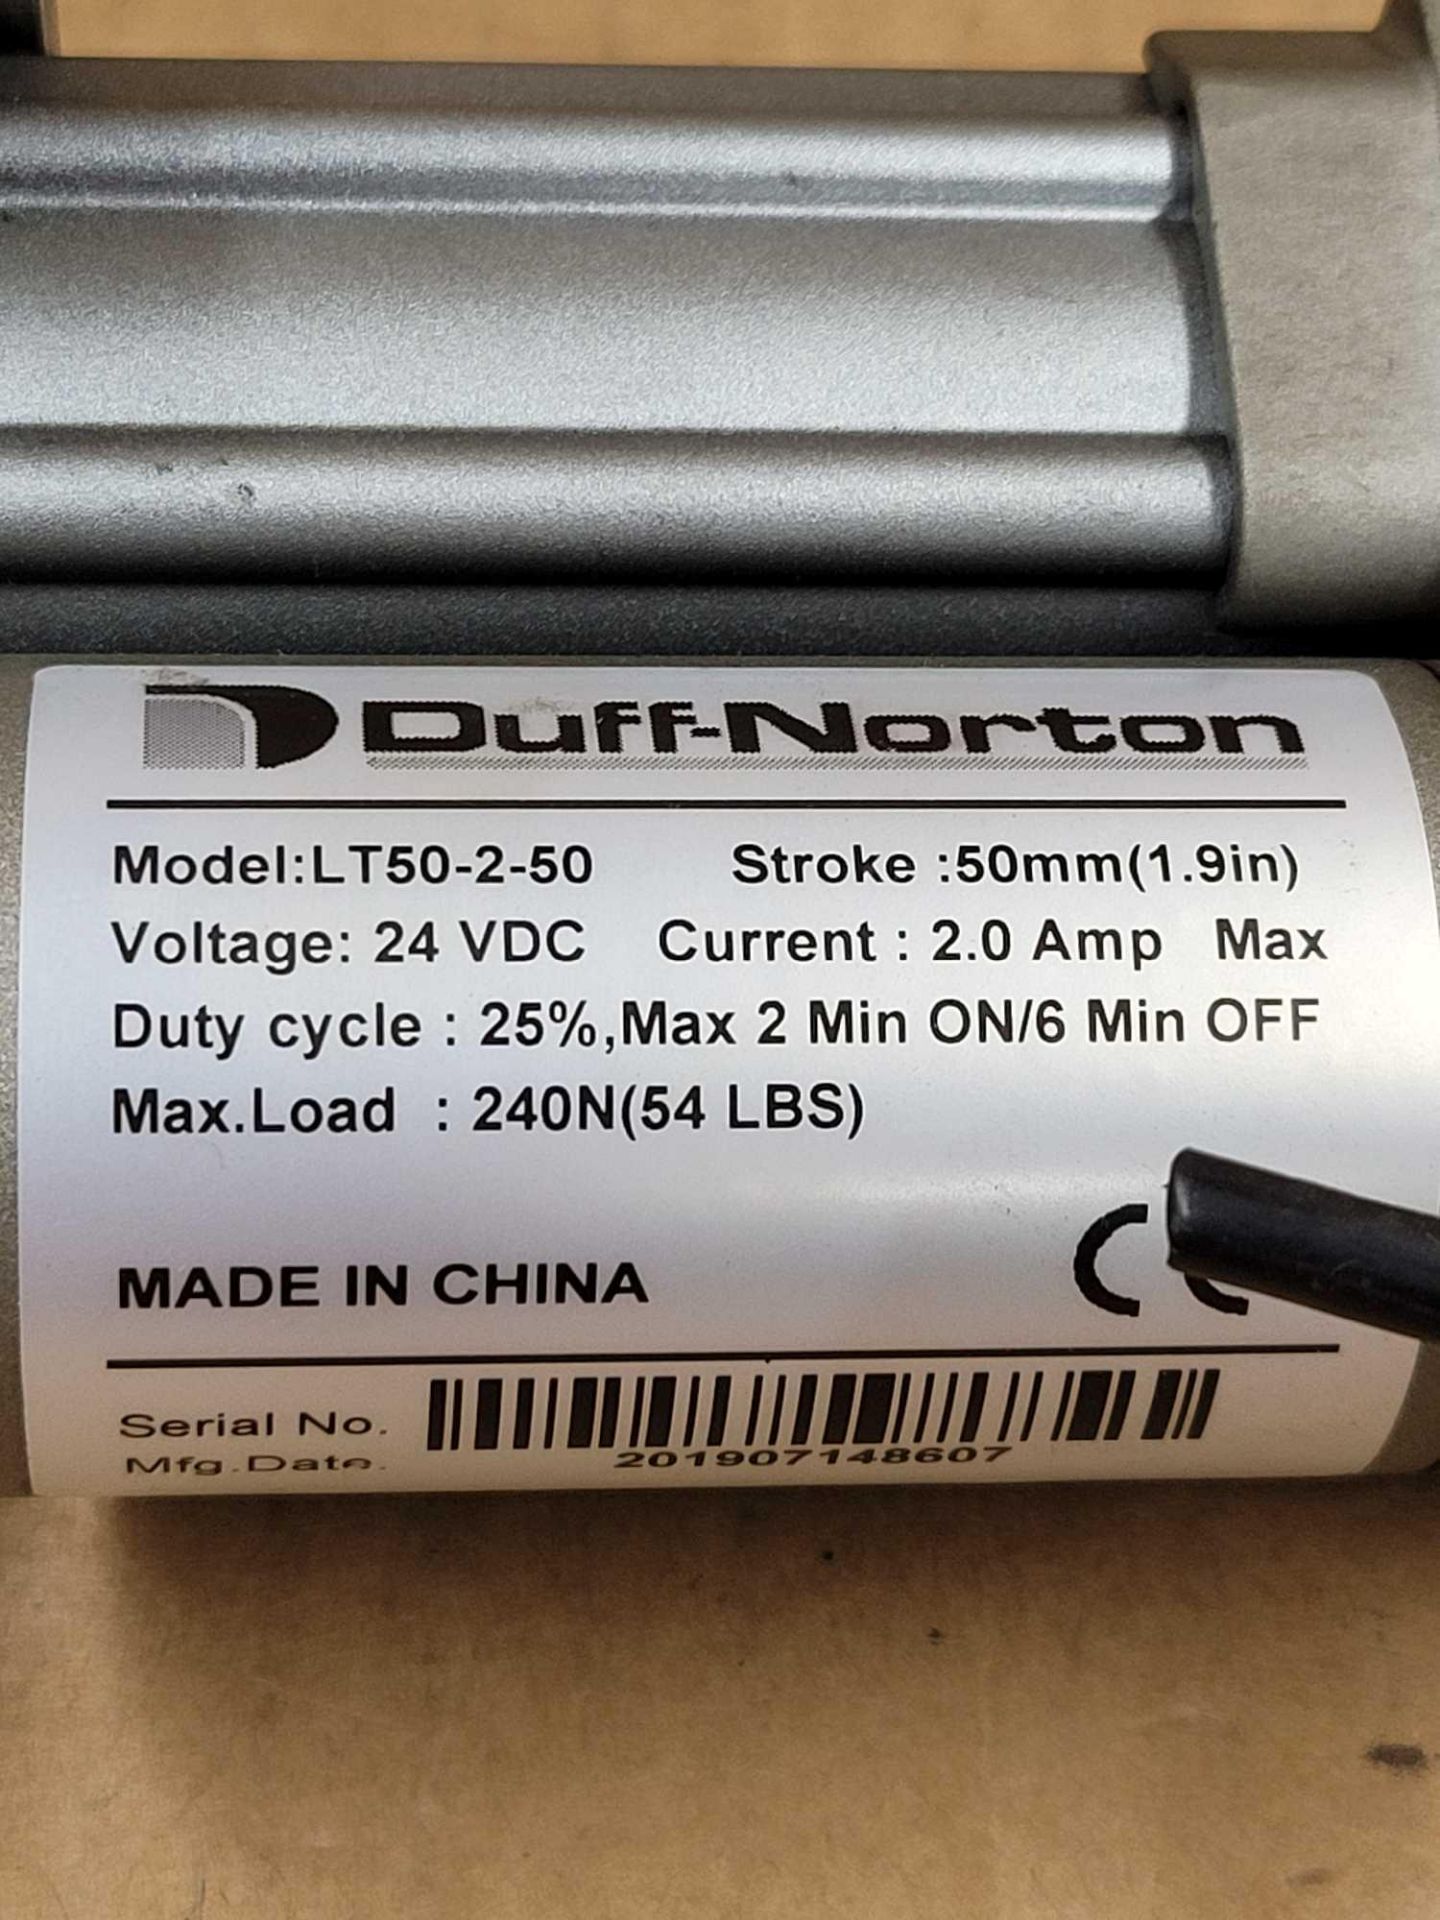 LOT OF 4 DUFF-NORTON LT50-2-50 / Linear Actuator  /  Lot Weight: 11.0 lbs - Image 3 of 7